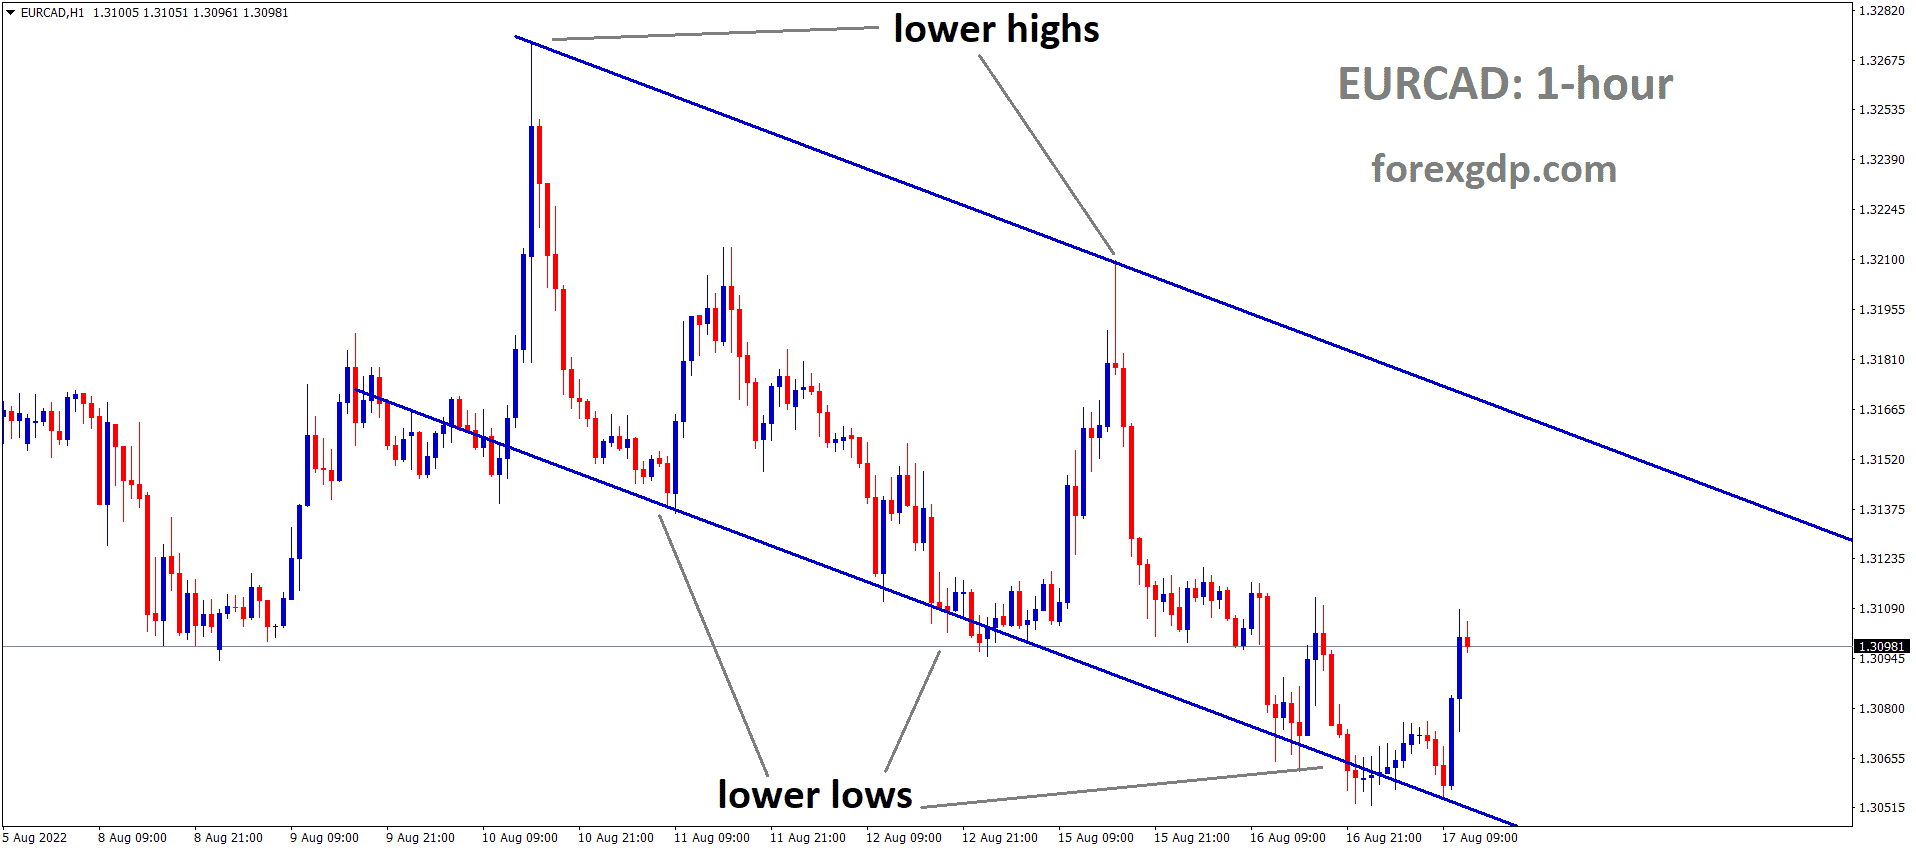 EURCAD is moving in the Descending channel and the Market has rebounded from the Lower low area of the channel